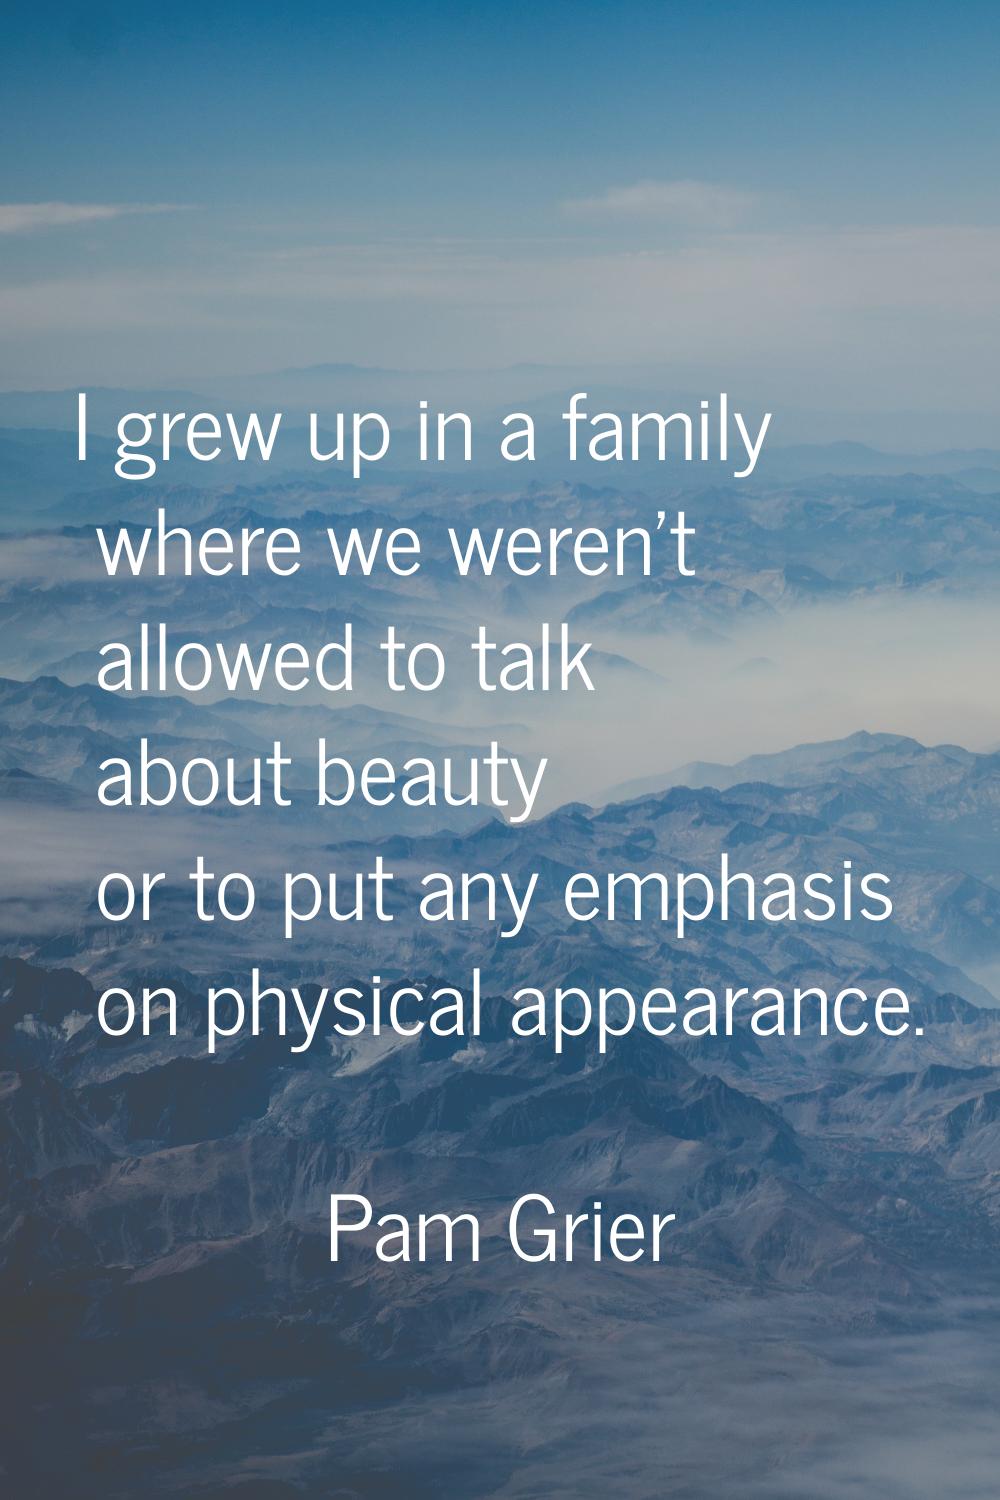 I grew up in a family where we weren't allowed to talk about beauty or to put any emphasis on physi